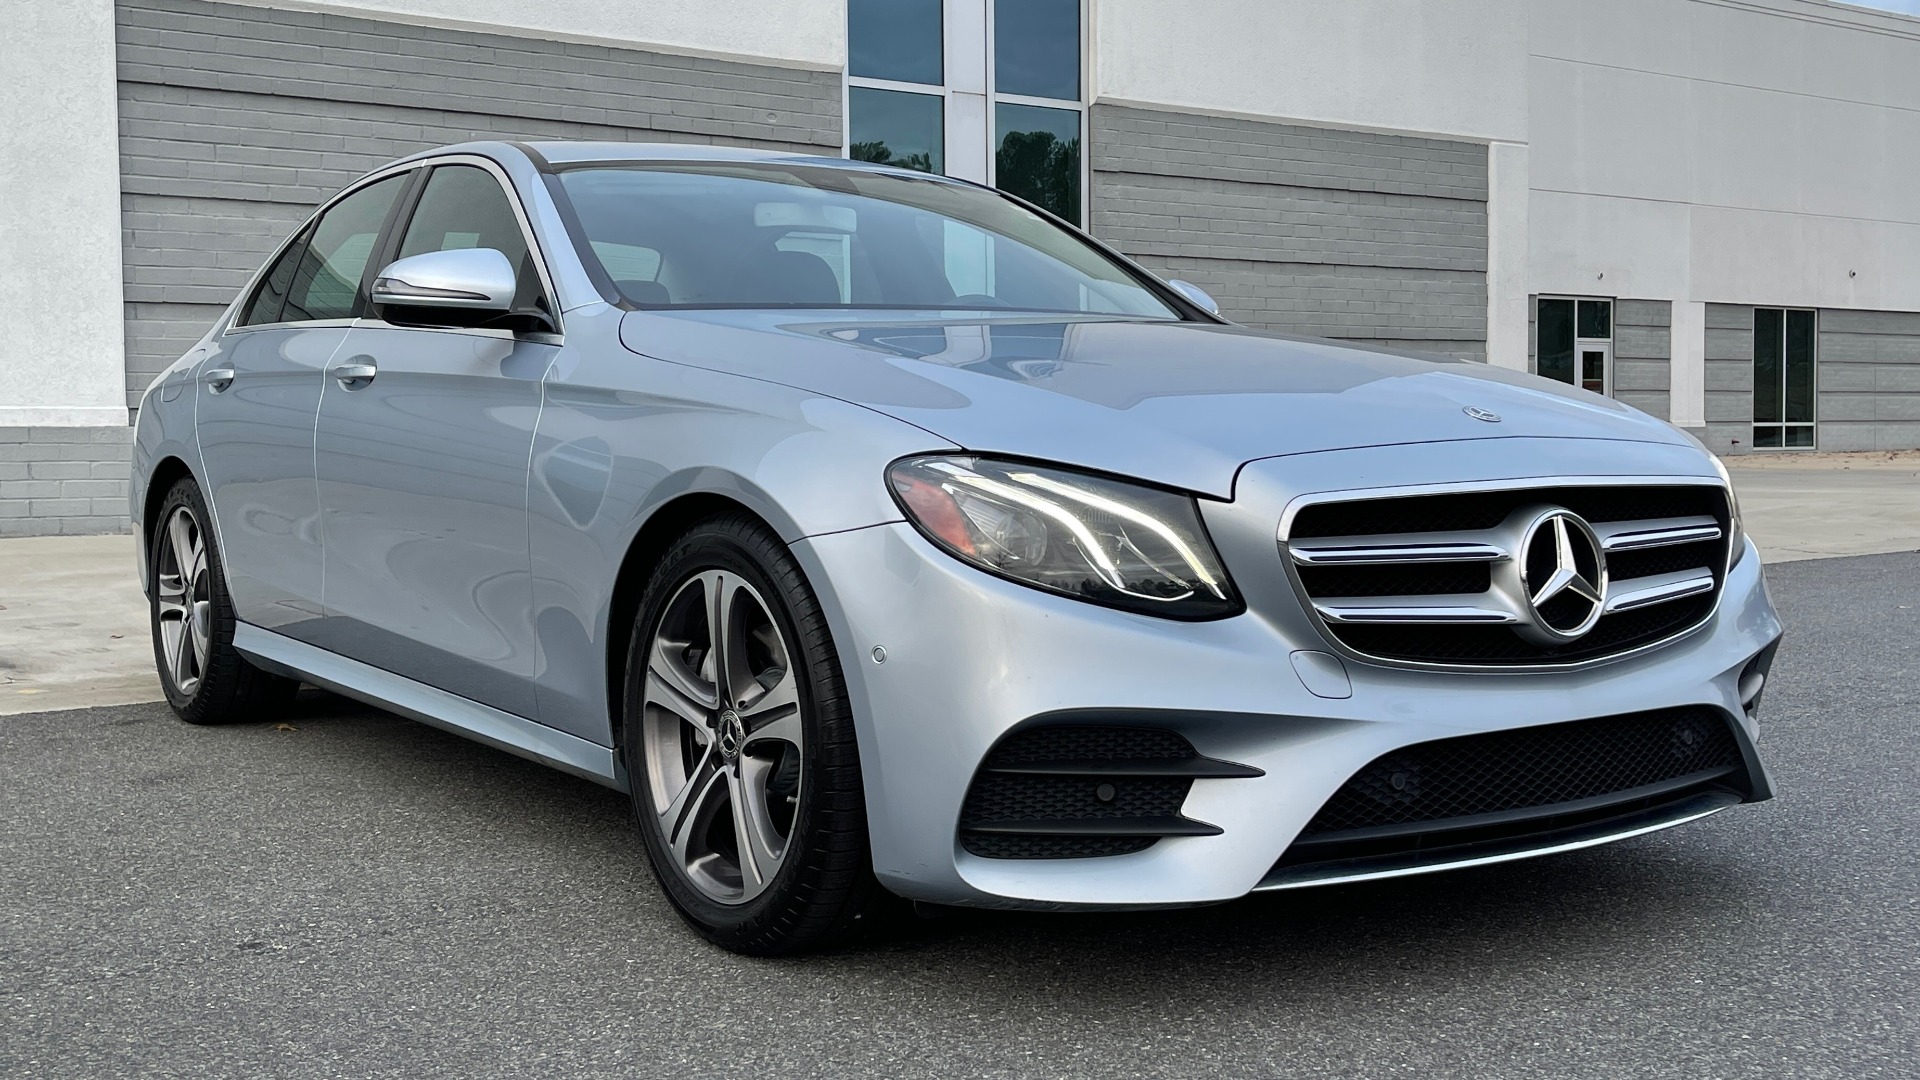 Used 2018 Mercedes-Benz E-CLASS E 300 PREMIUM / NAV / SUNROOF / BURMESTER / PARK ASST / REARVIEW for sale $36,999 at Formula Imports in Charlotte NC 28227 8